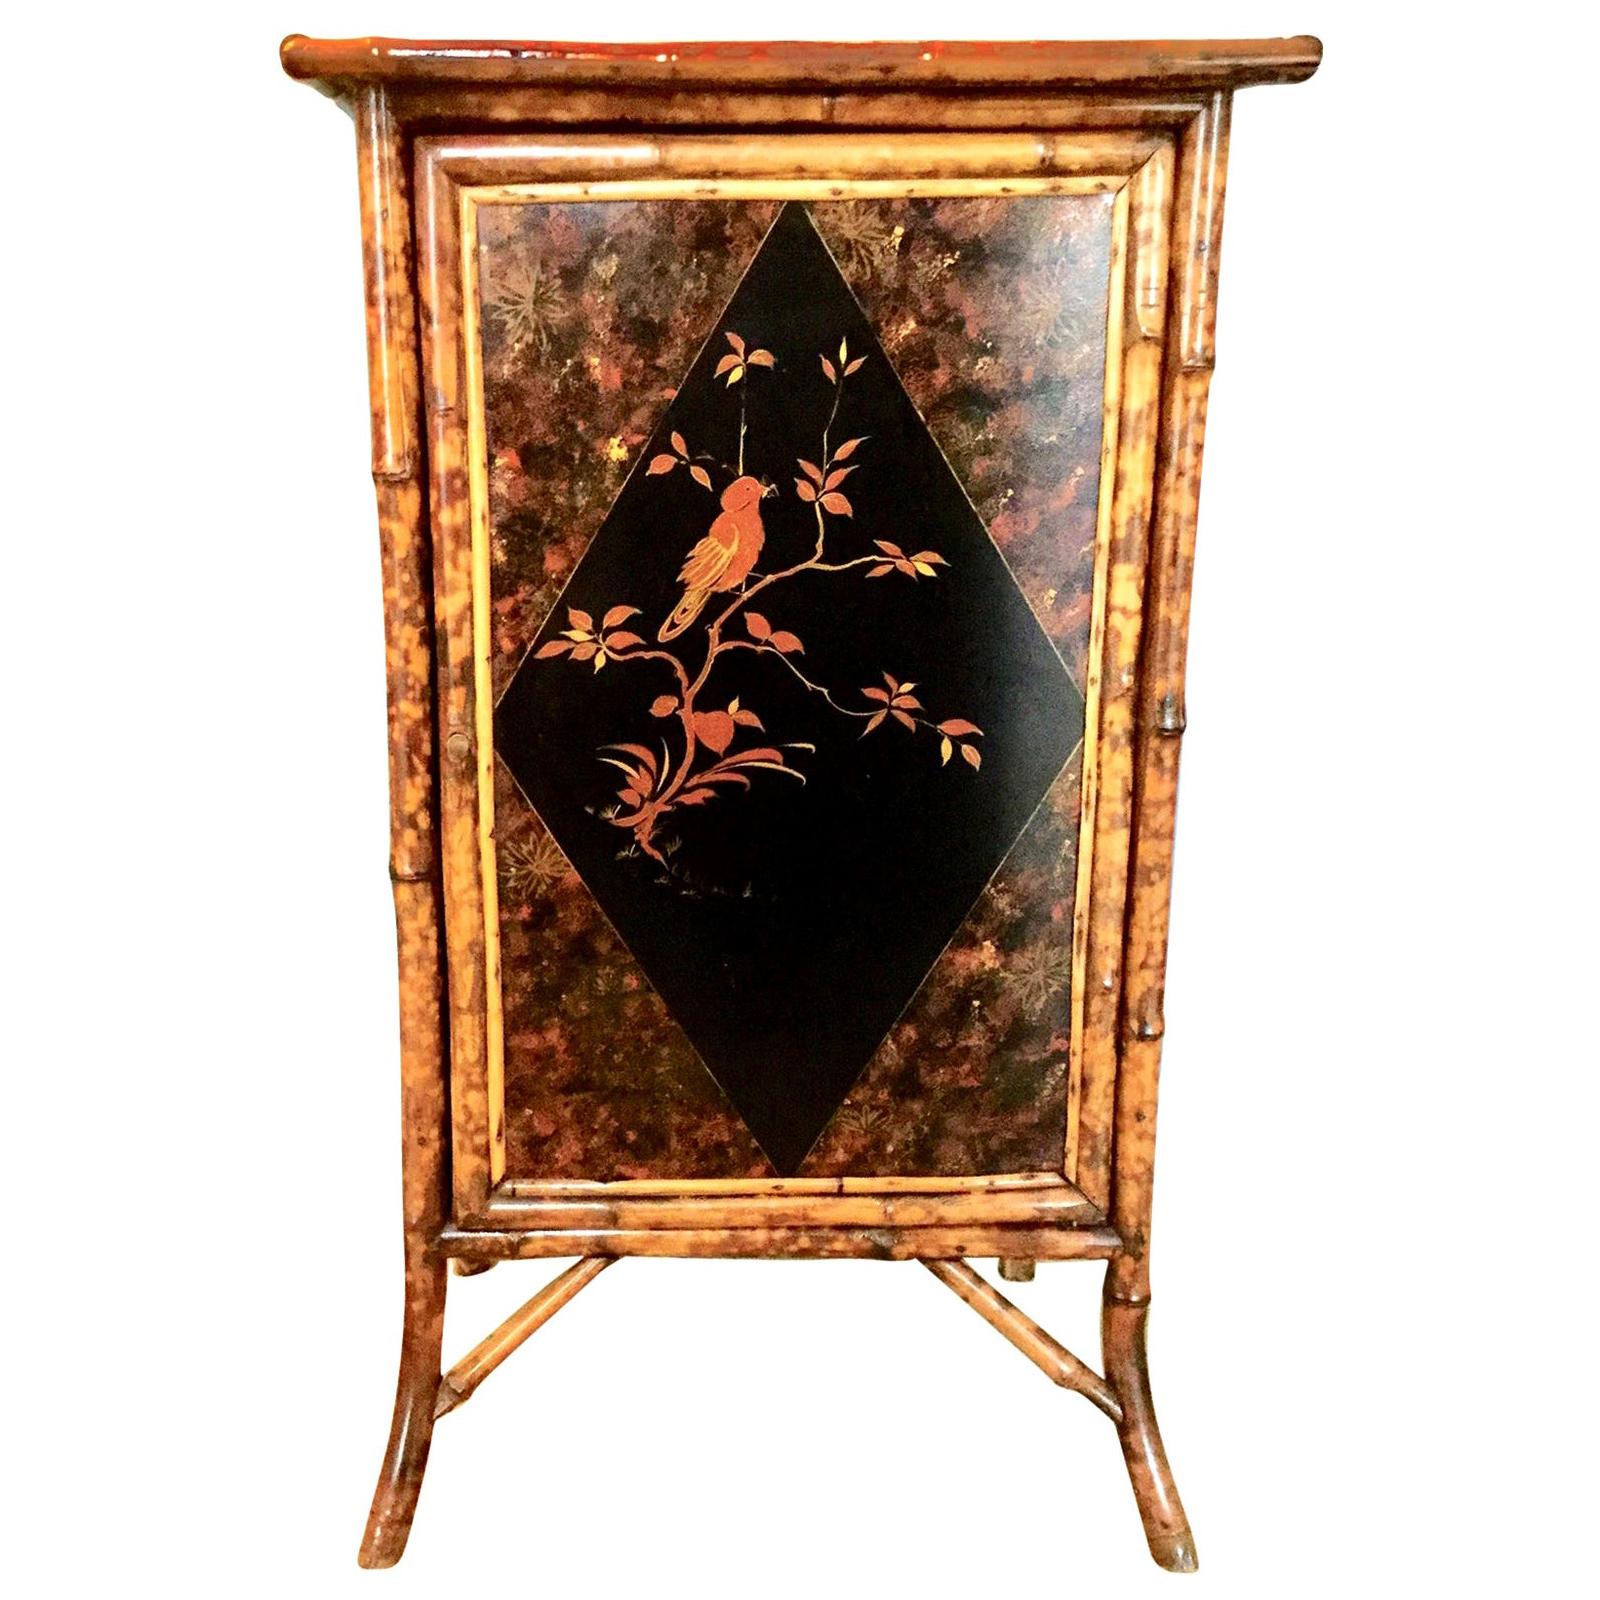 Lovely 19th century English bamboo cabinet with chinoiserie panels on three sides and the top. Beautiful motif’s of birds and floral lacquered panels on all three sides and top. The inside has three areas with shelves in between.
A great focal